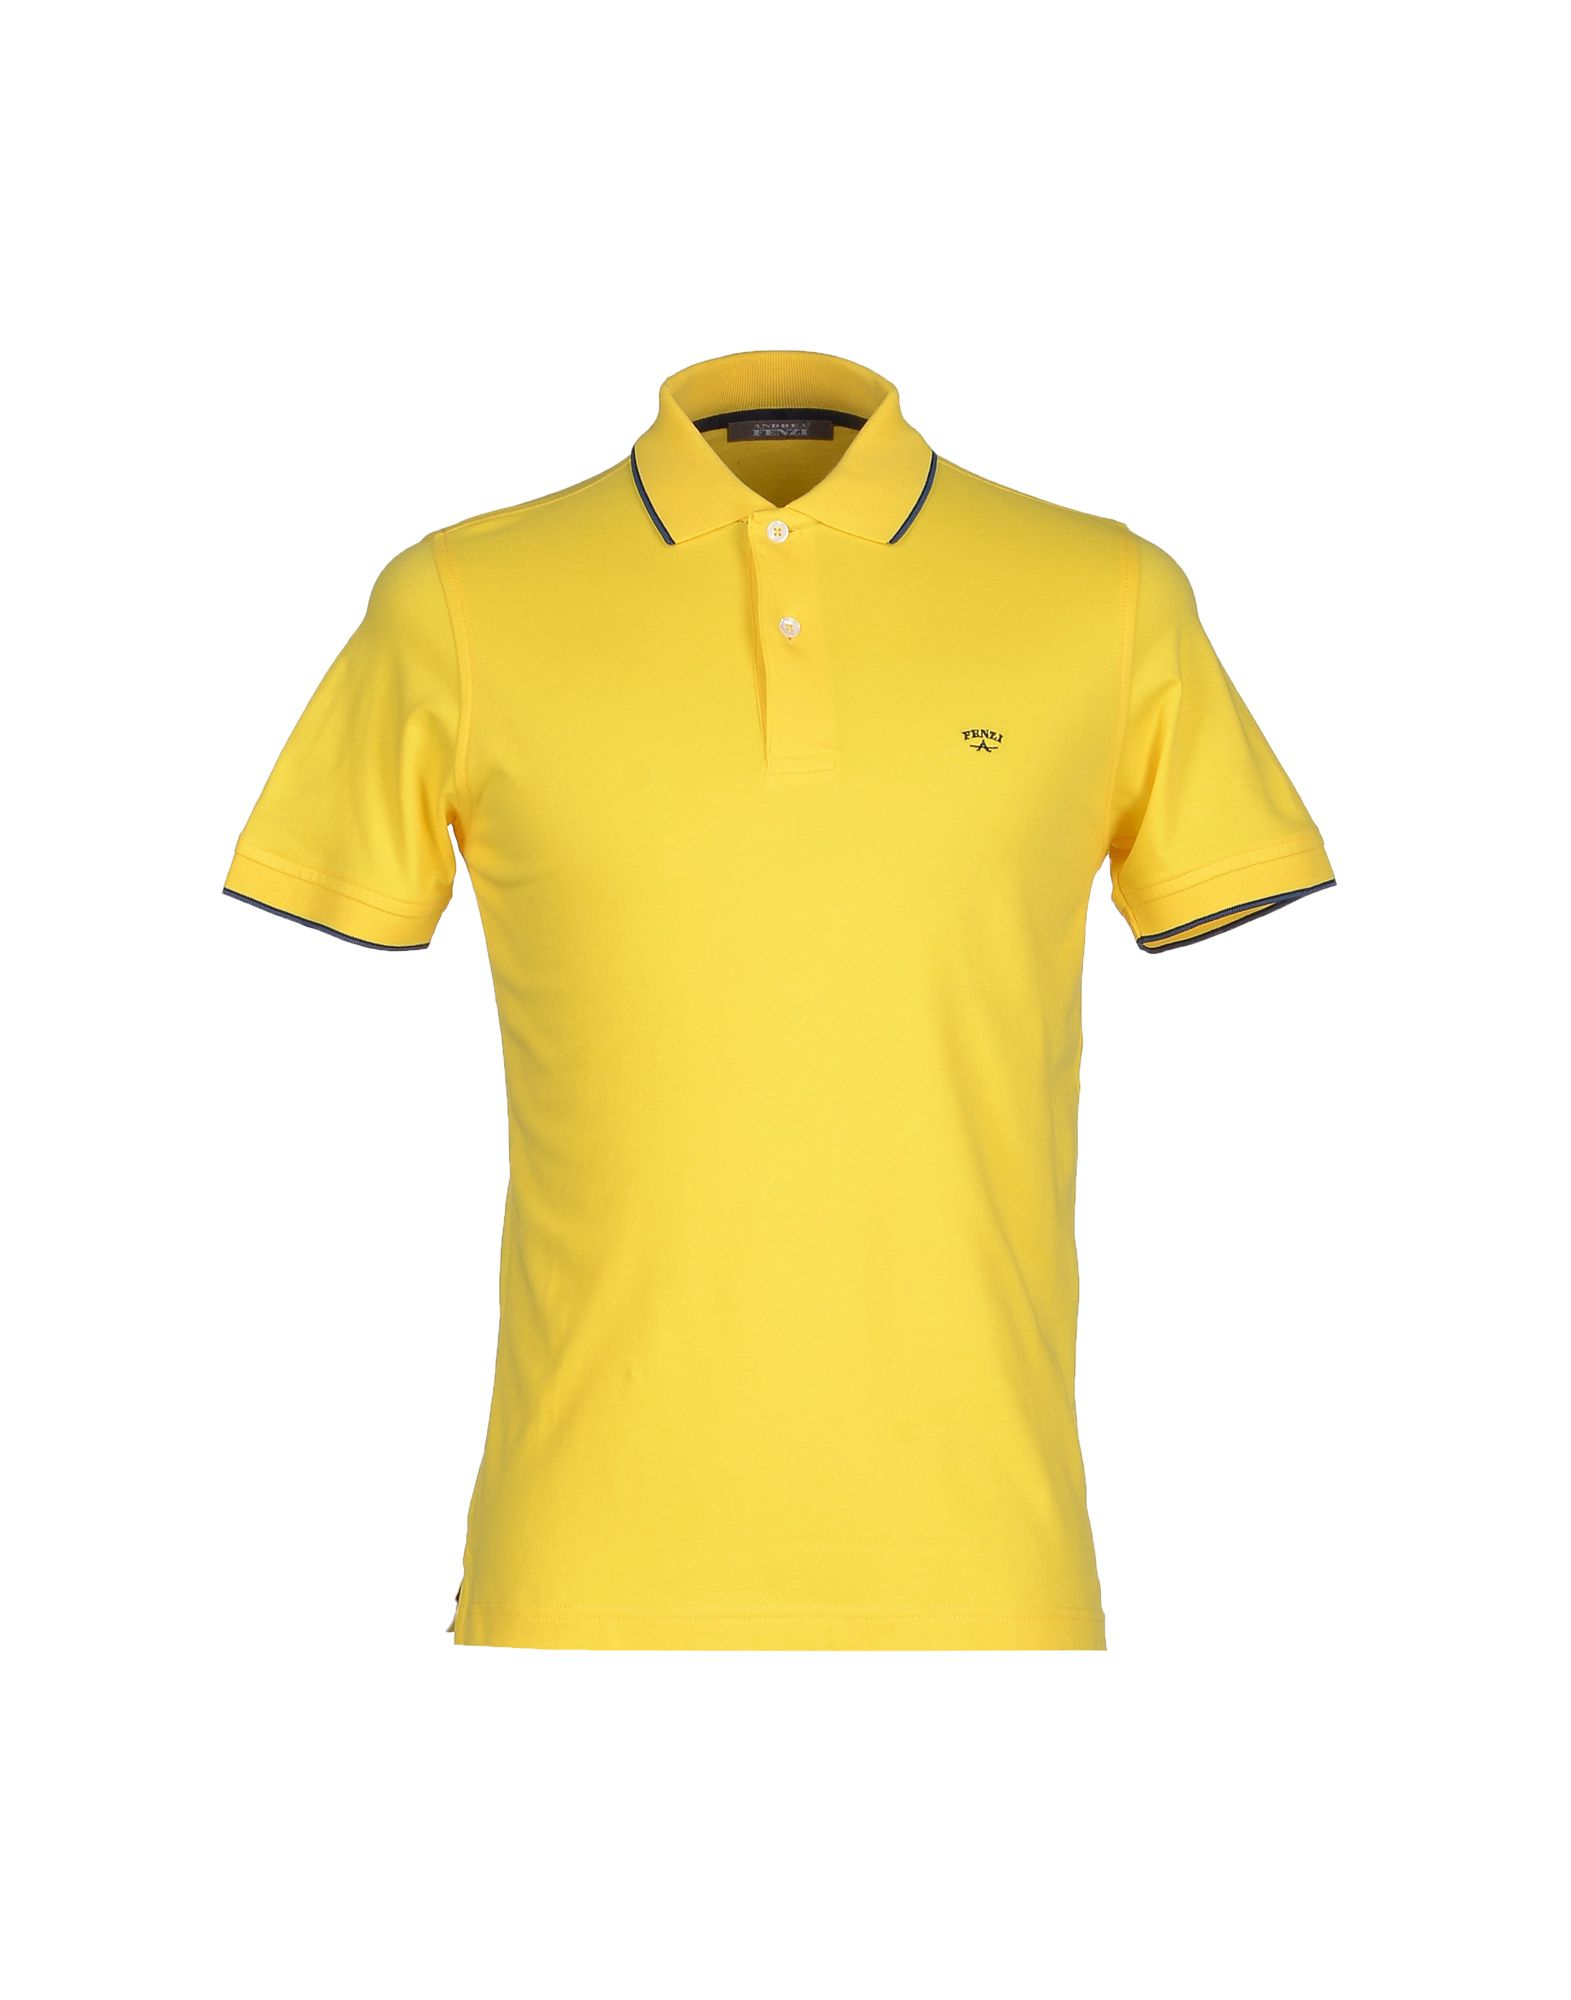 Andrea fenzi Polo Shirt in Yellow for Men | Lyst